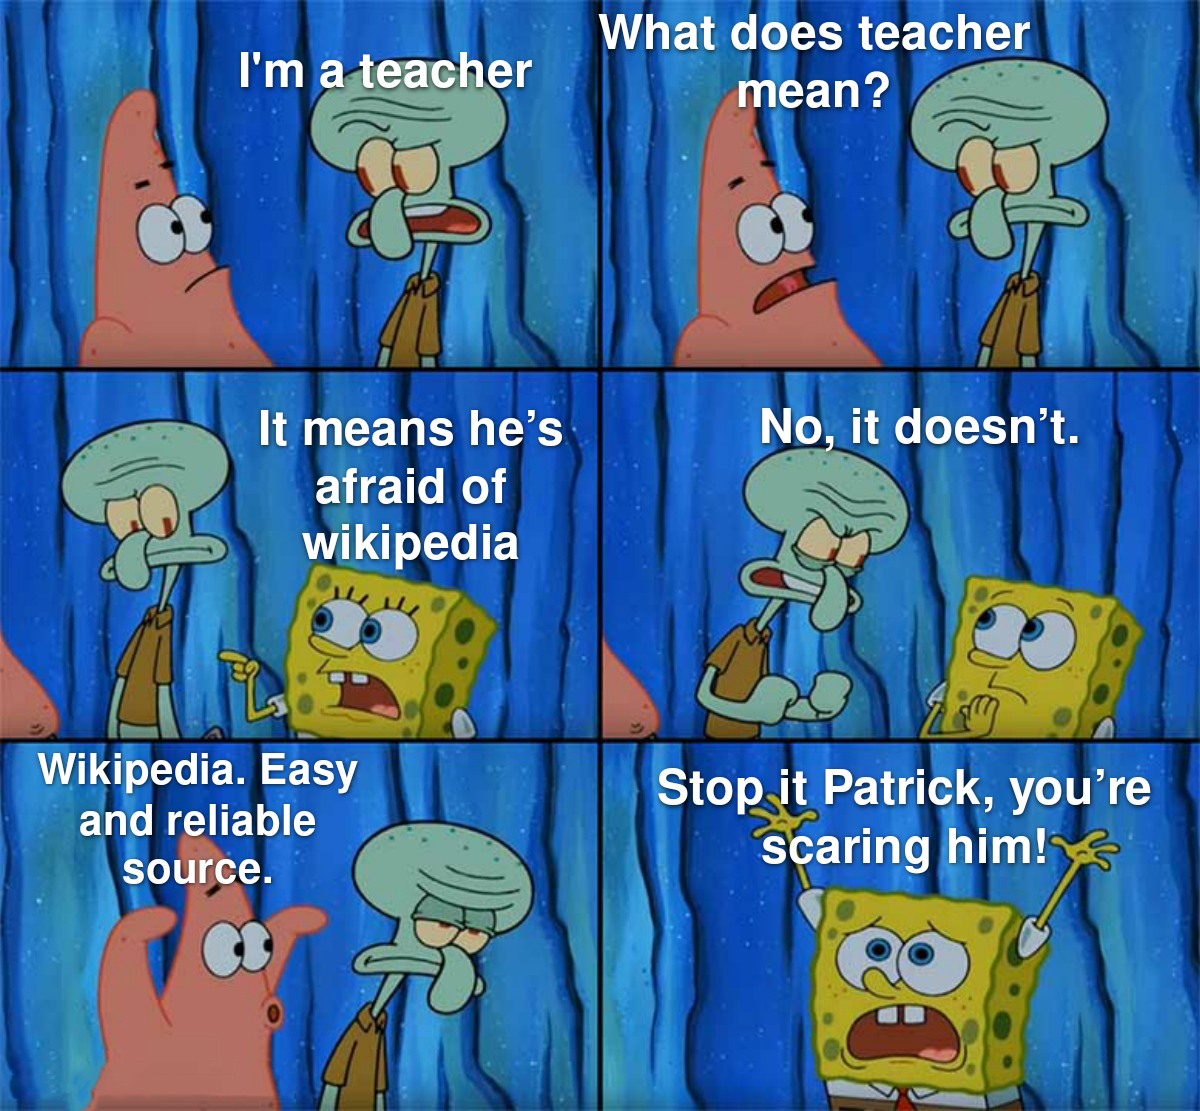 stop it patrick you re scaring him - I'm a teacher What does teacher mean? No, it doesn't. It means he's afraid of wikipedia Wikipedia. Easy and reliable source. 00 Stop it Patrick, you're Scaring him!